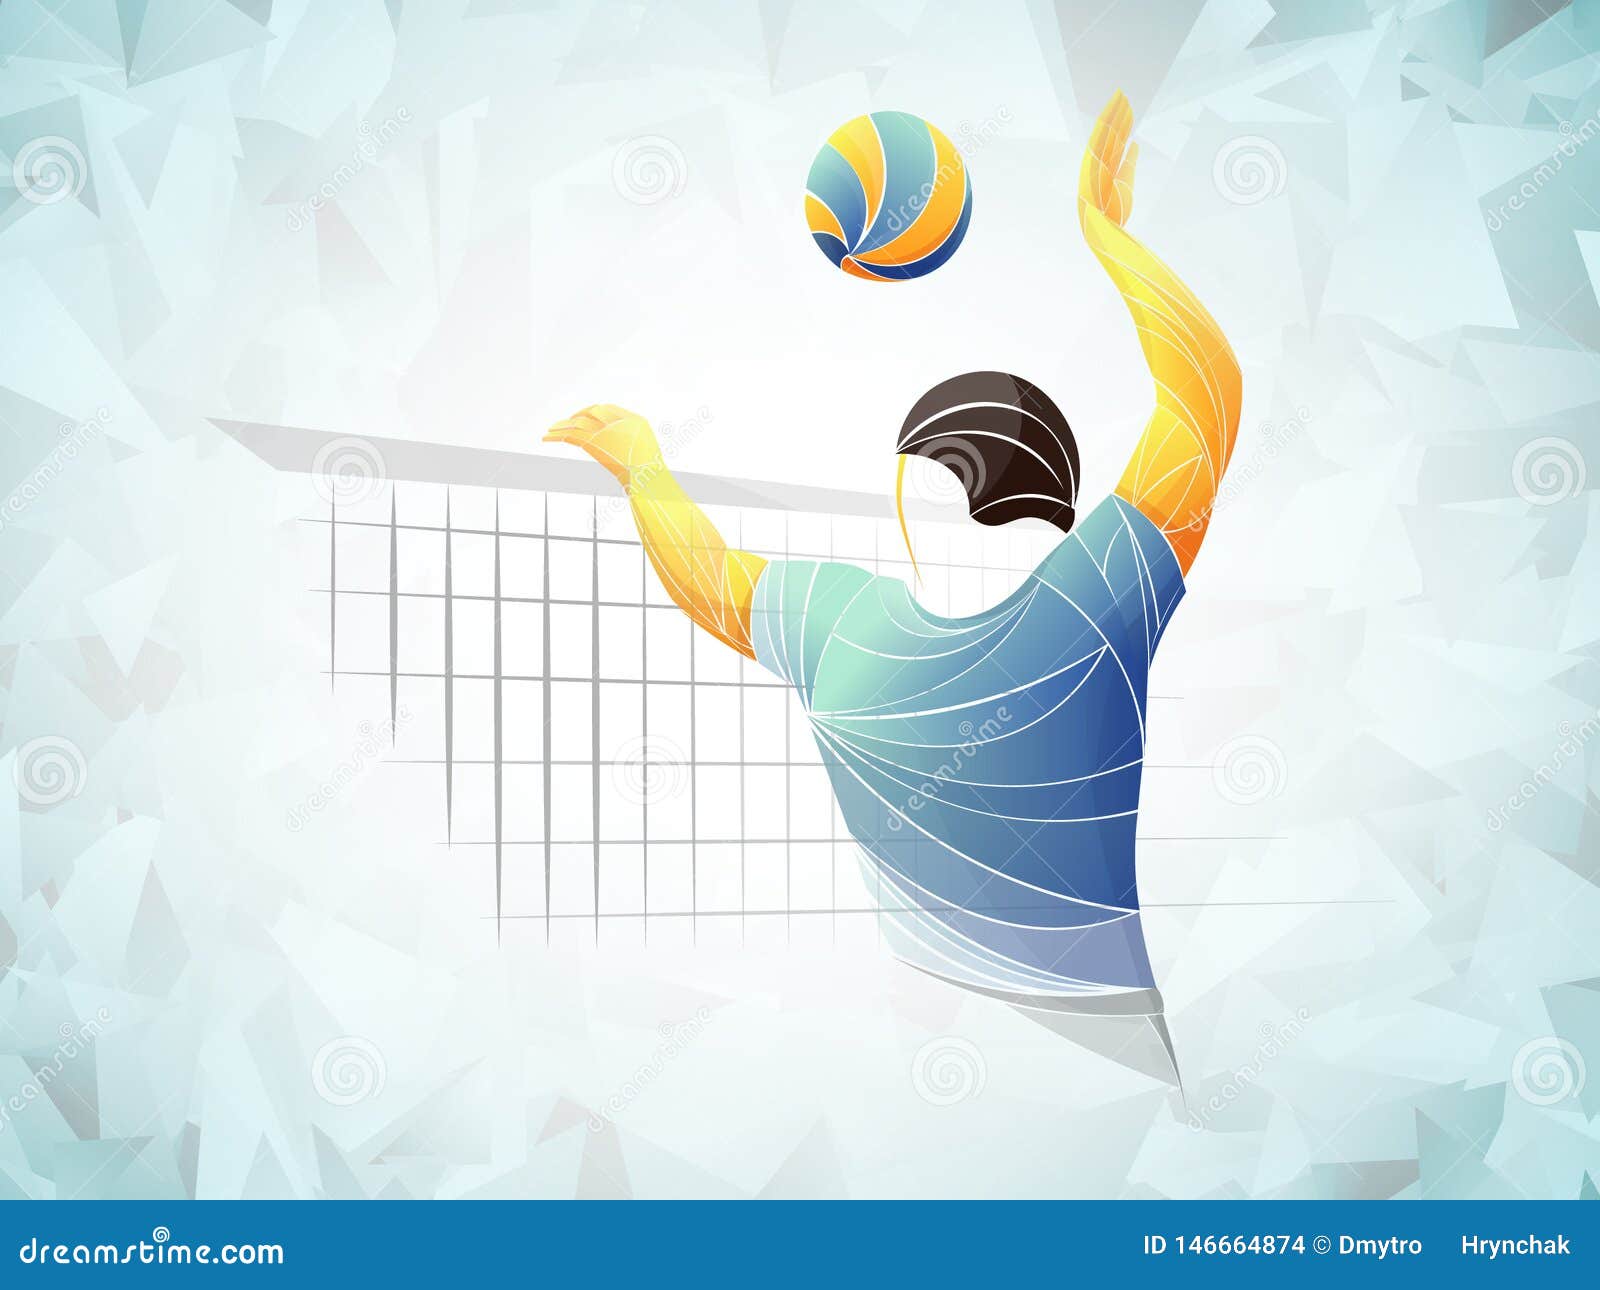 International Volleyball, Volleyball Live, Play Volleyball, Women Volleyball, Volleyball Player Stock Vector